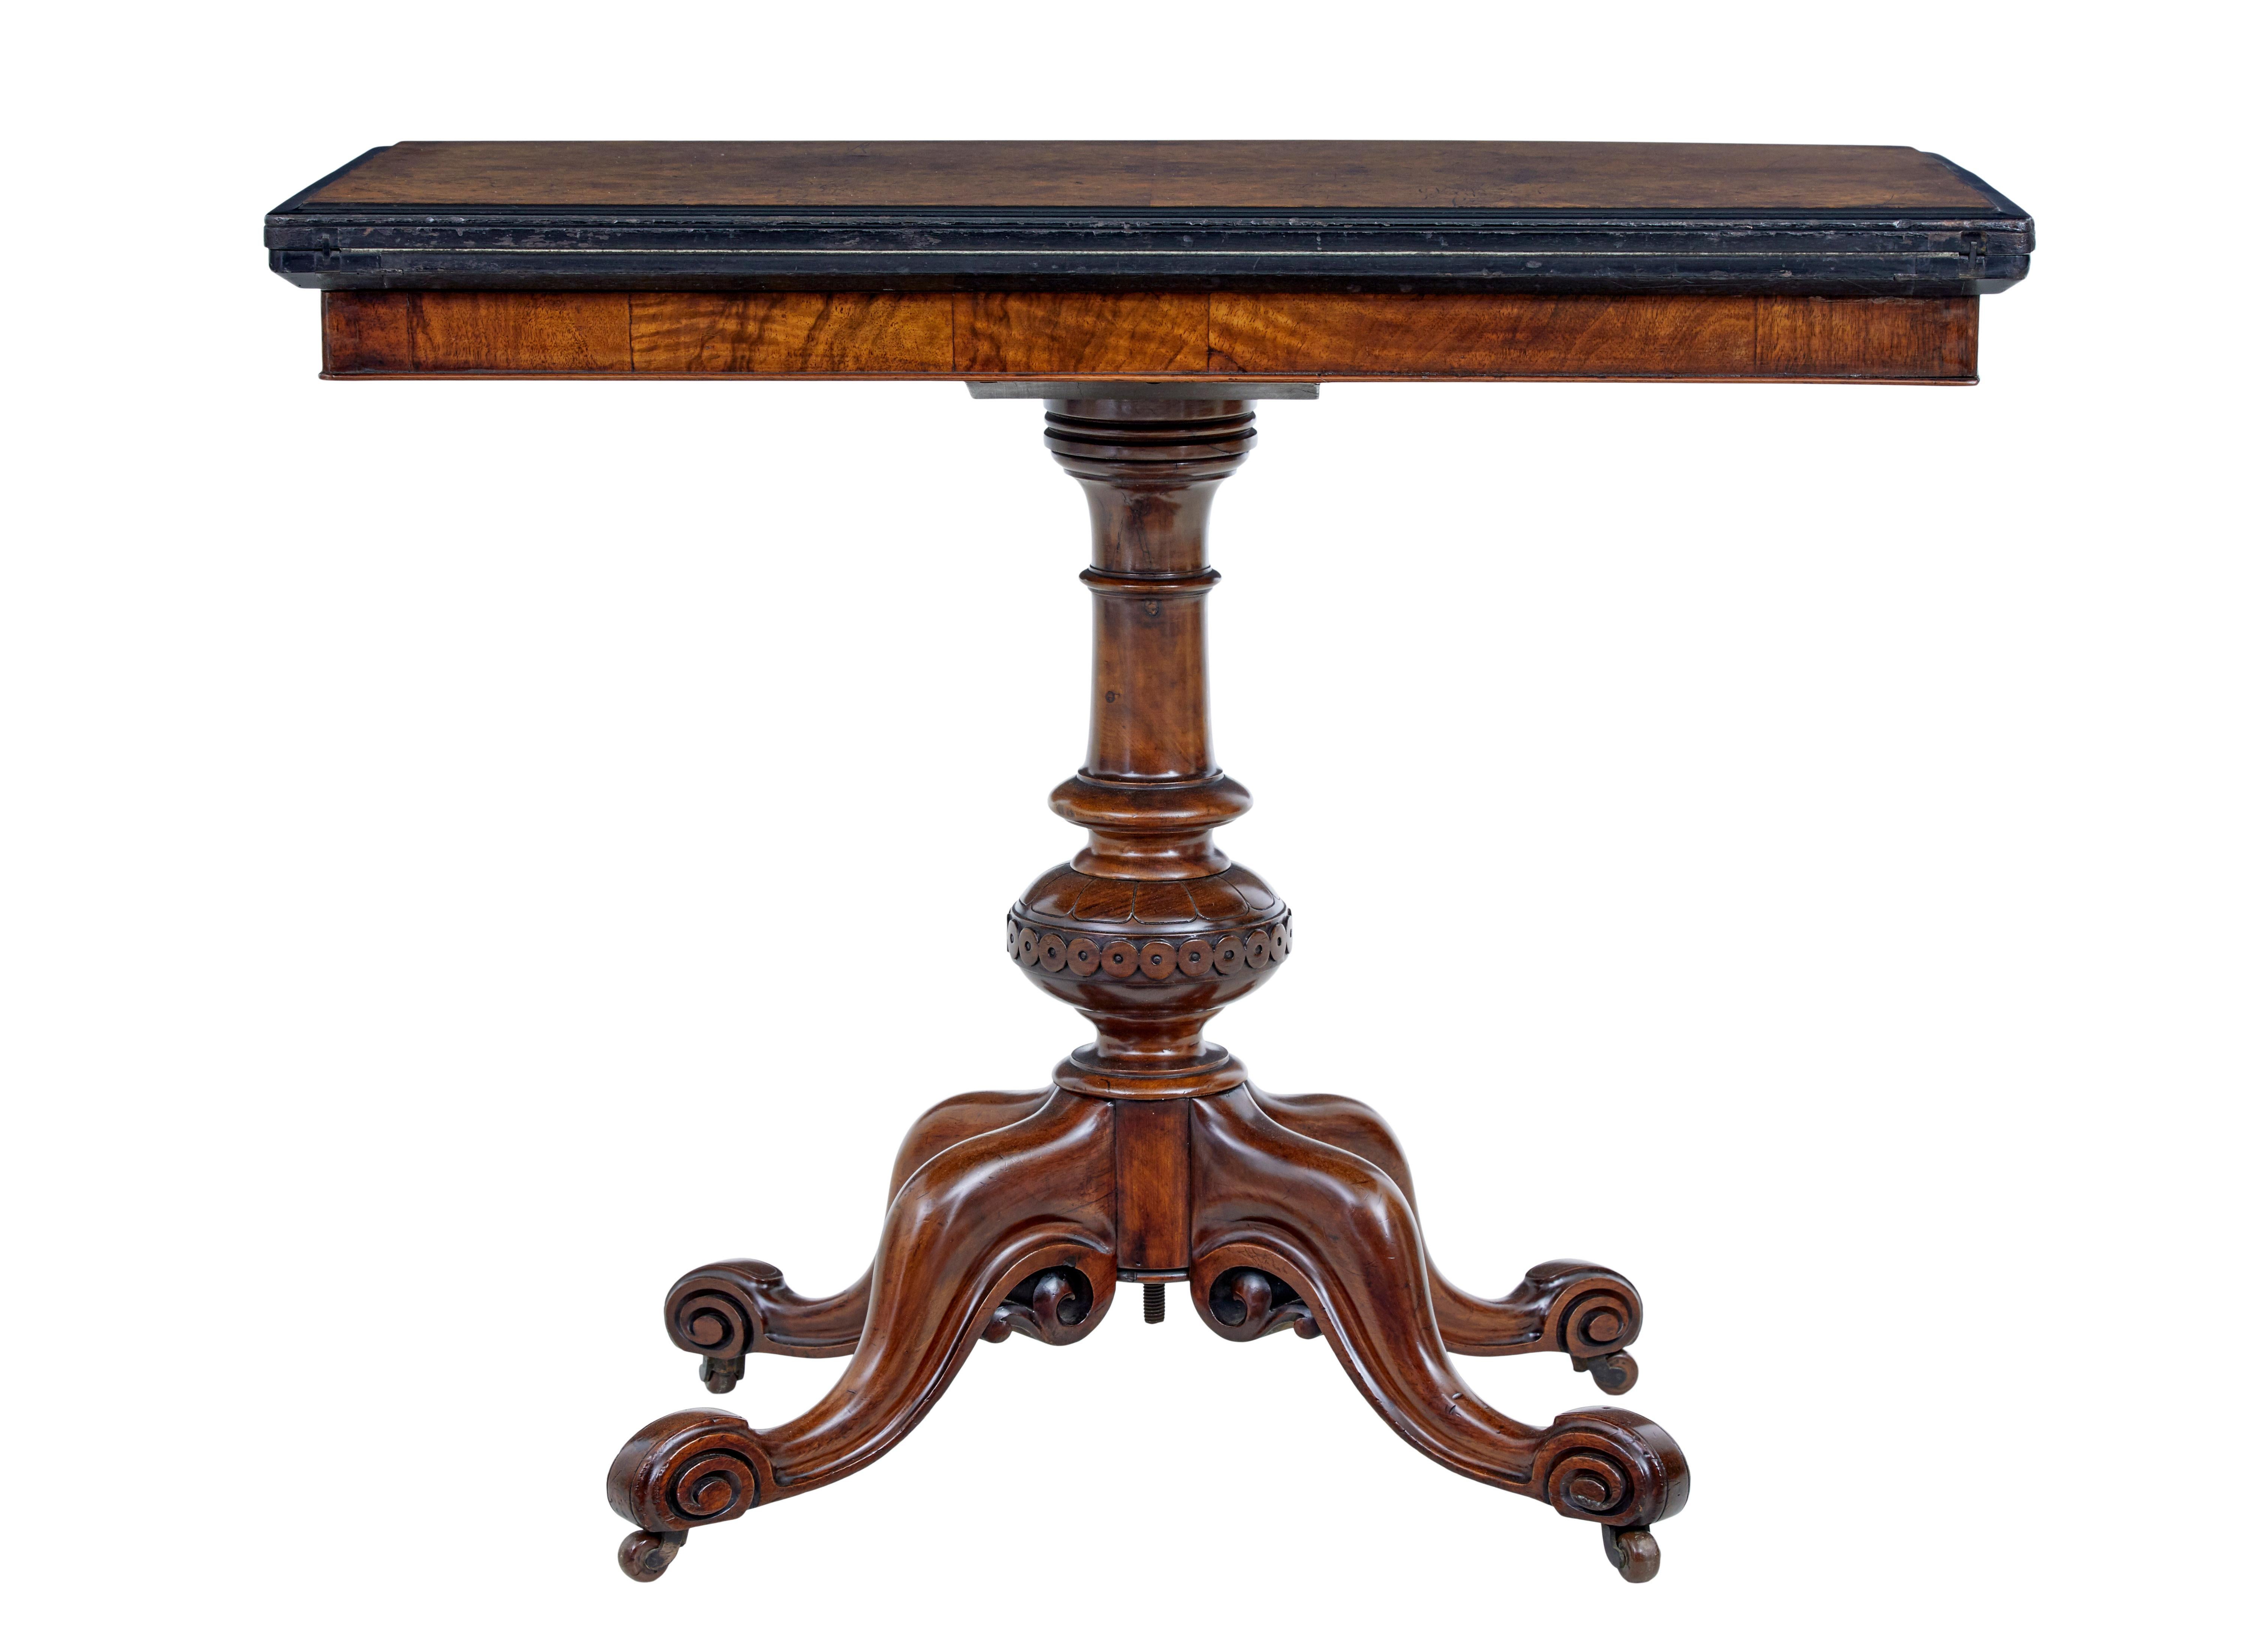 19th century carved walnut and ebonised card table circa 1880.

Burr walnut top with ebonised moulded edge, top rotates to reveal a shallow storage well and open's out to reveal a striking blue baize playing surface.  Stands on a typical high